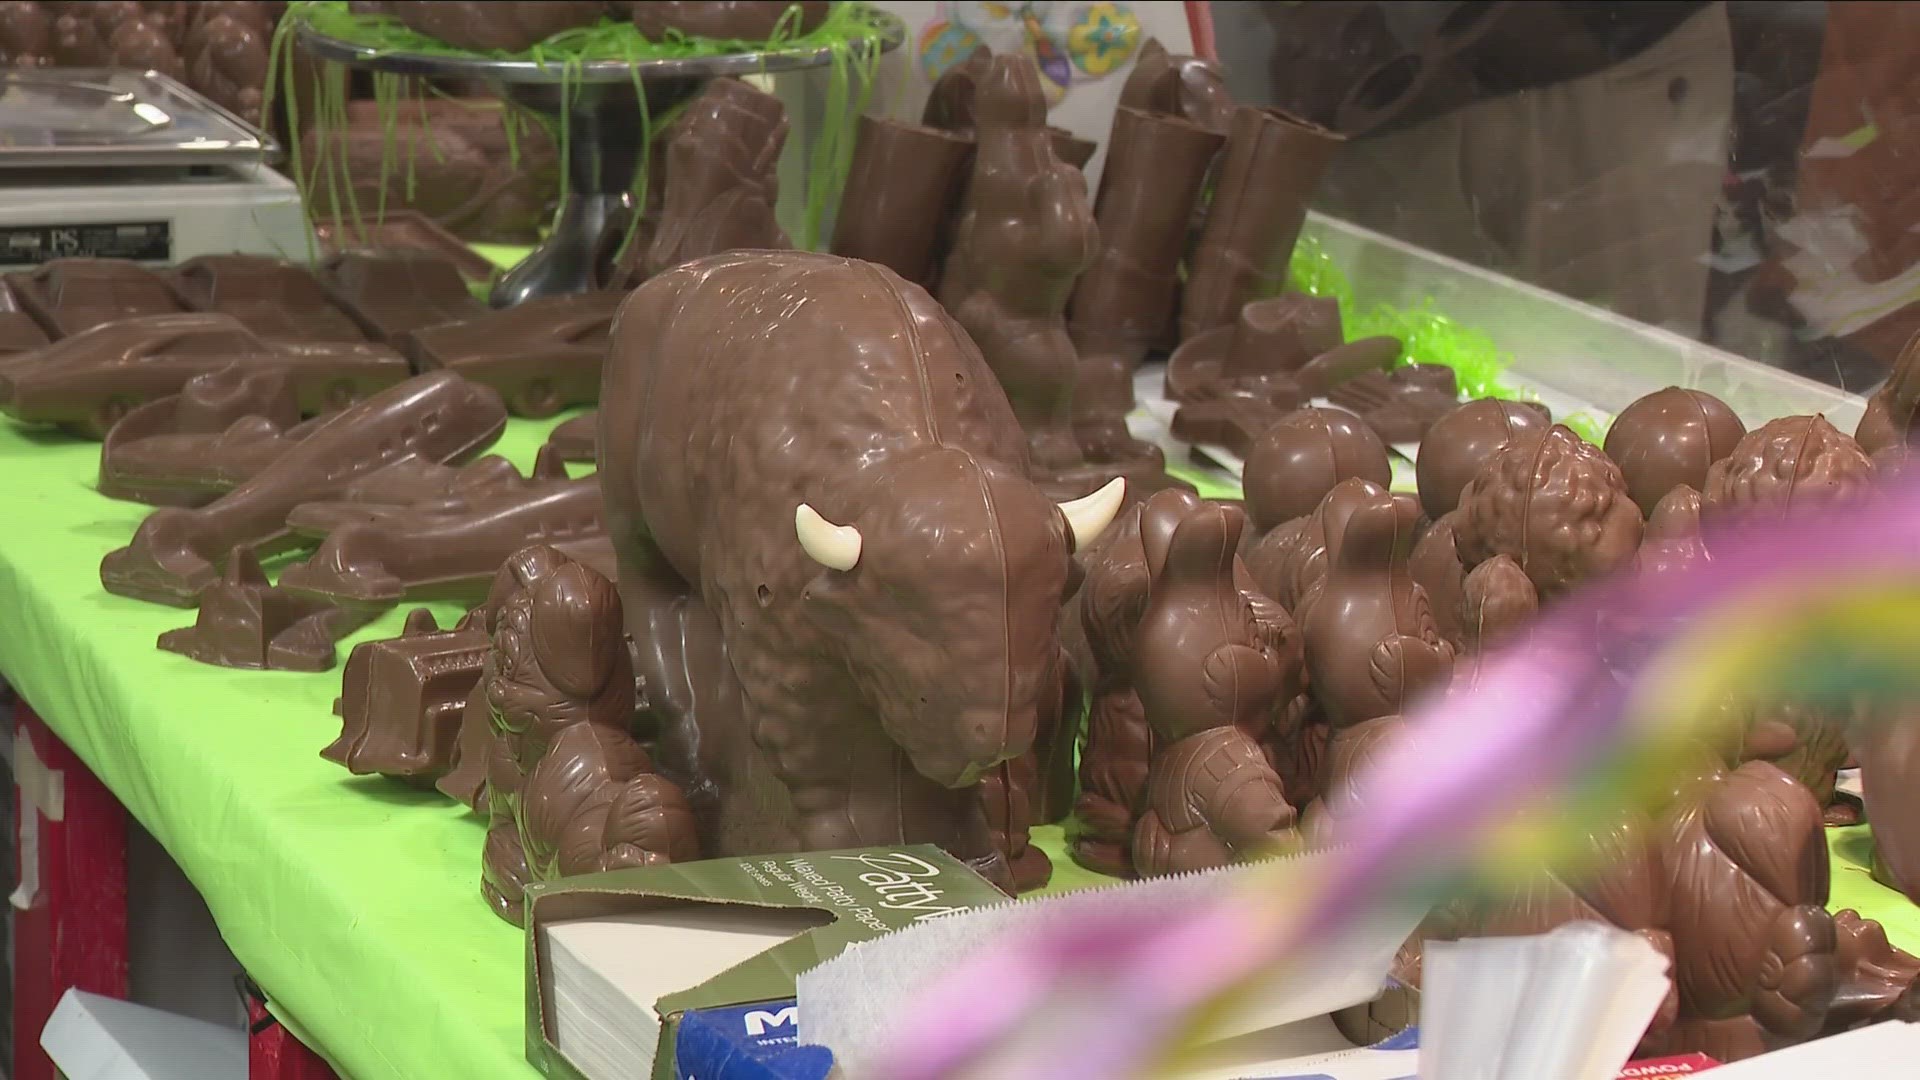 The study from WalletHub puts the Queen City in the number two spot for celebrating Easter.